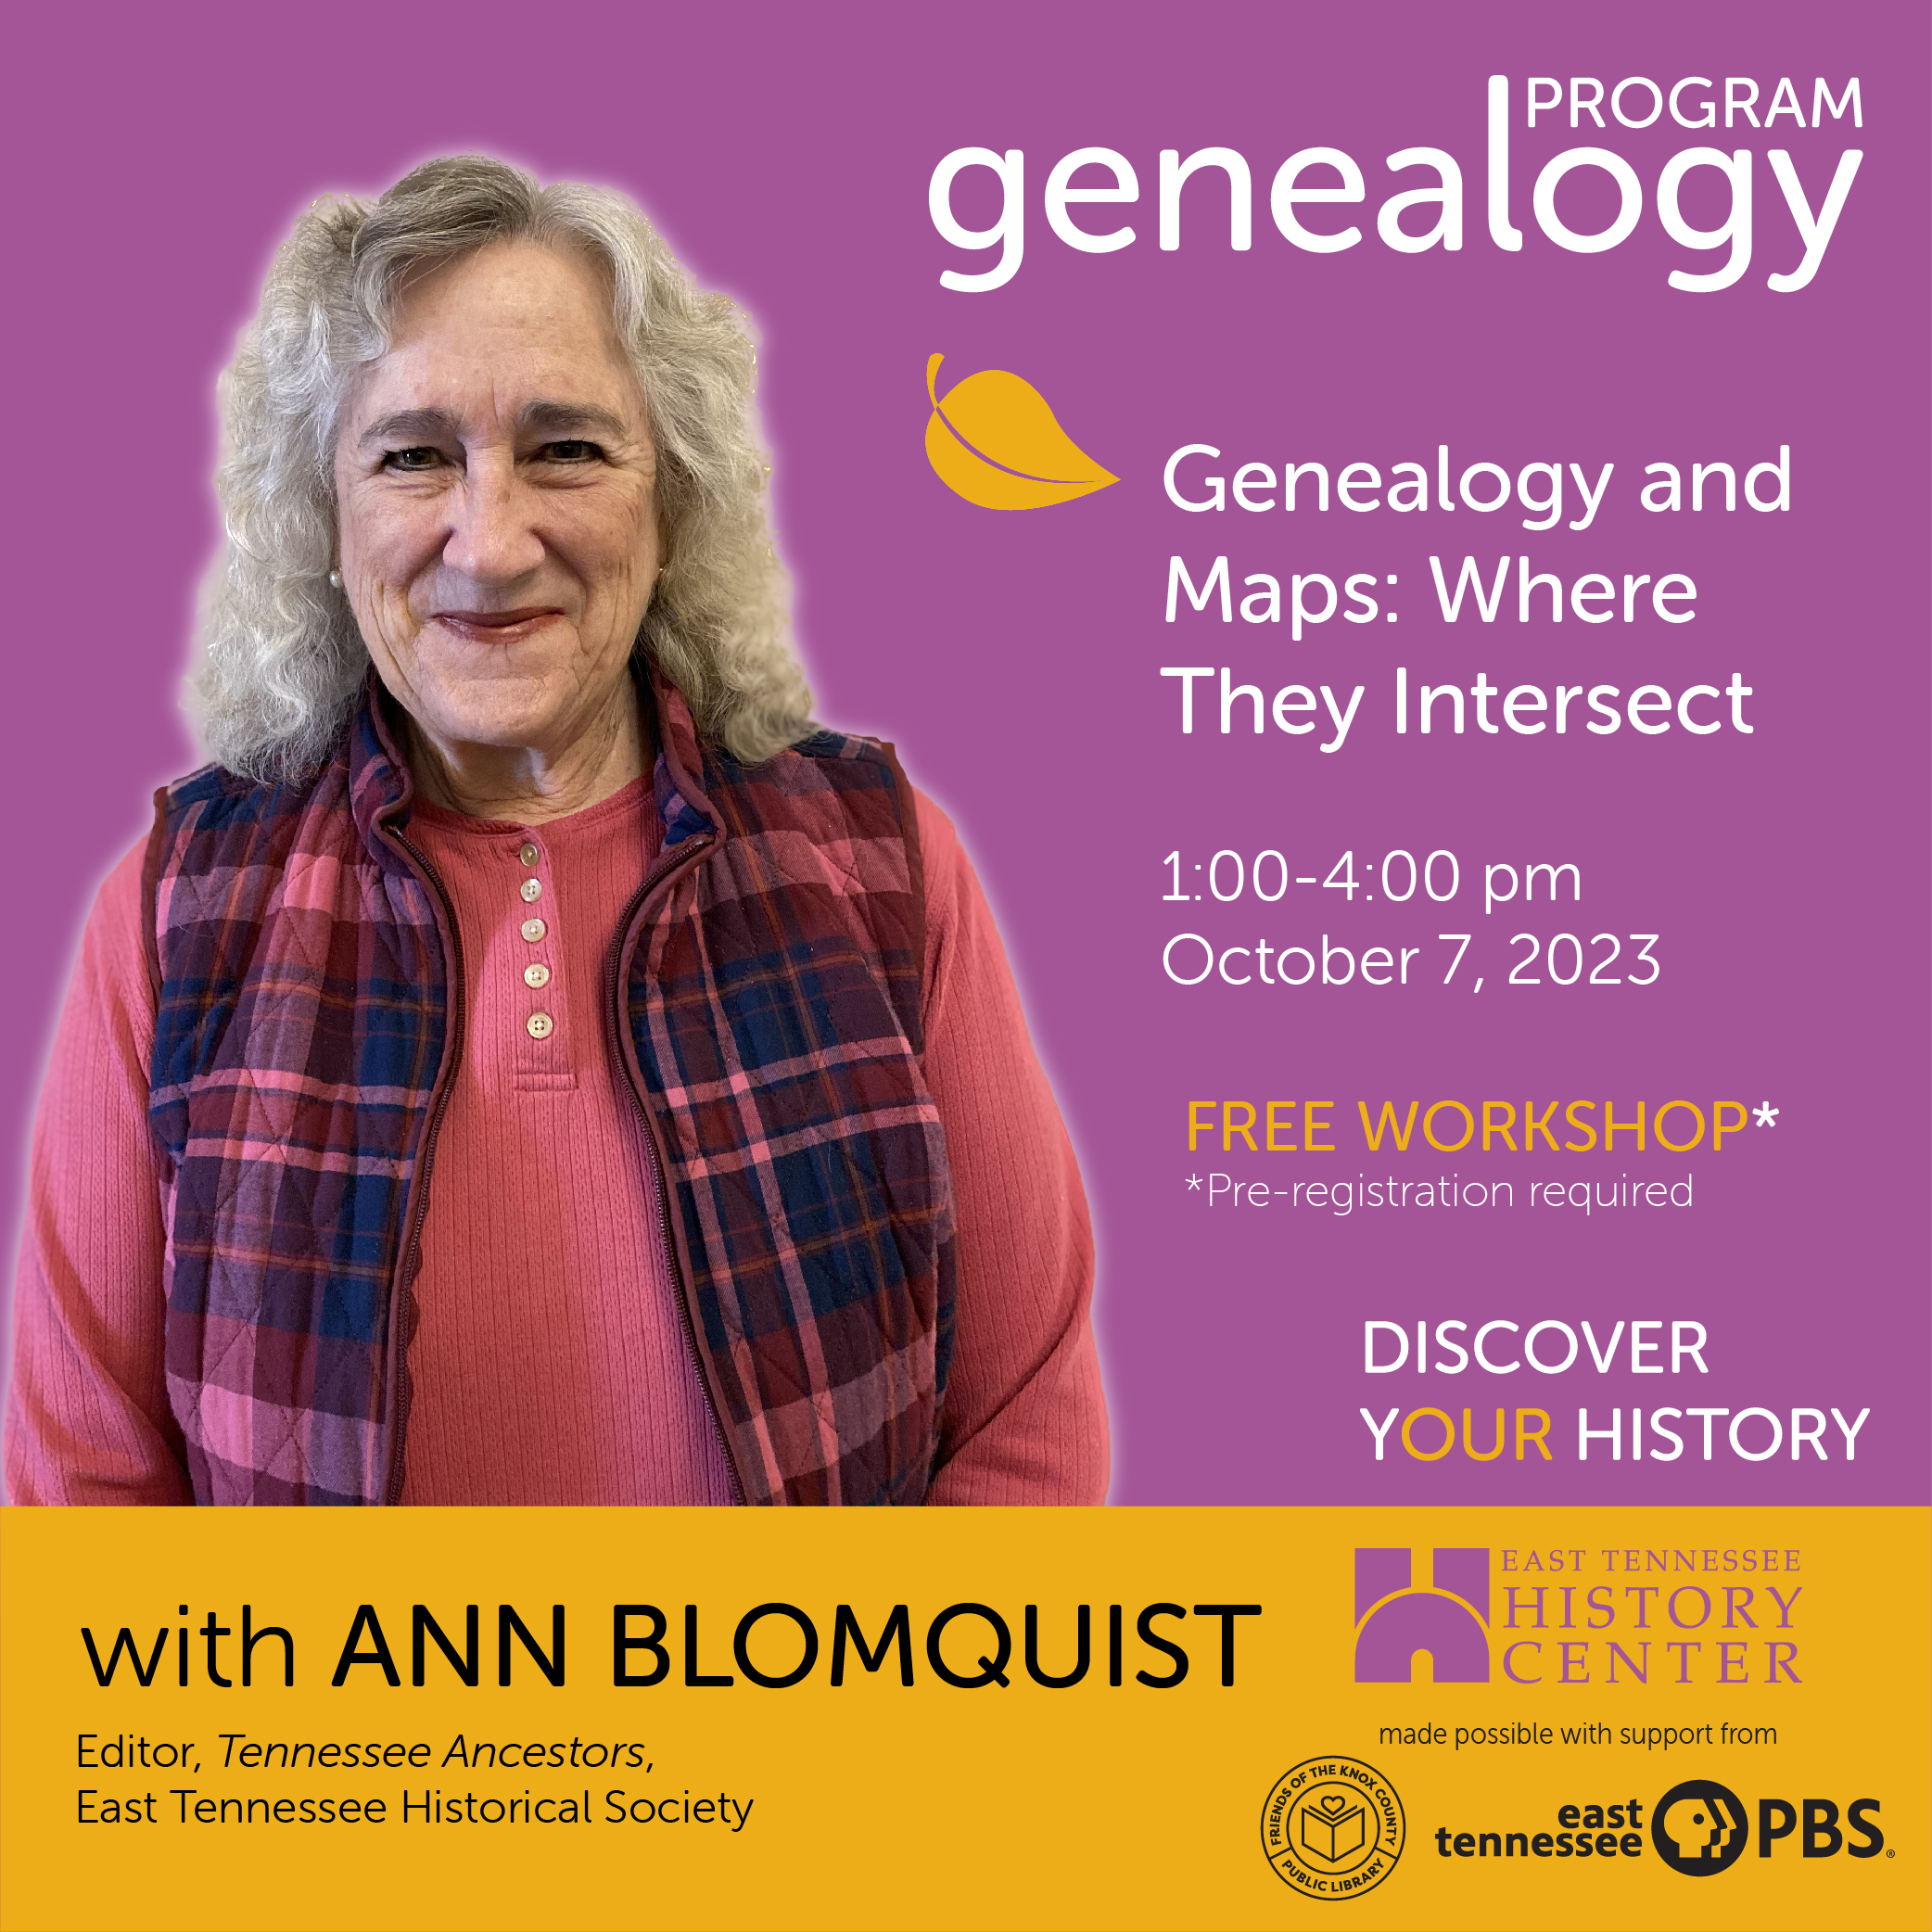 WORKSHOP: Genealogy and Maps: Where They Intersect